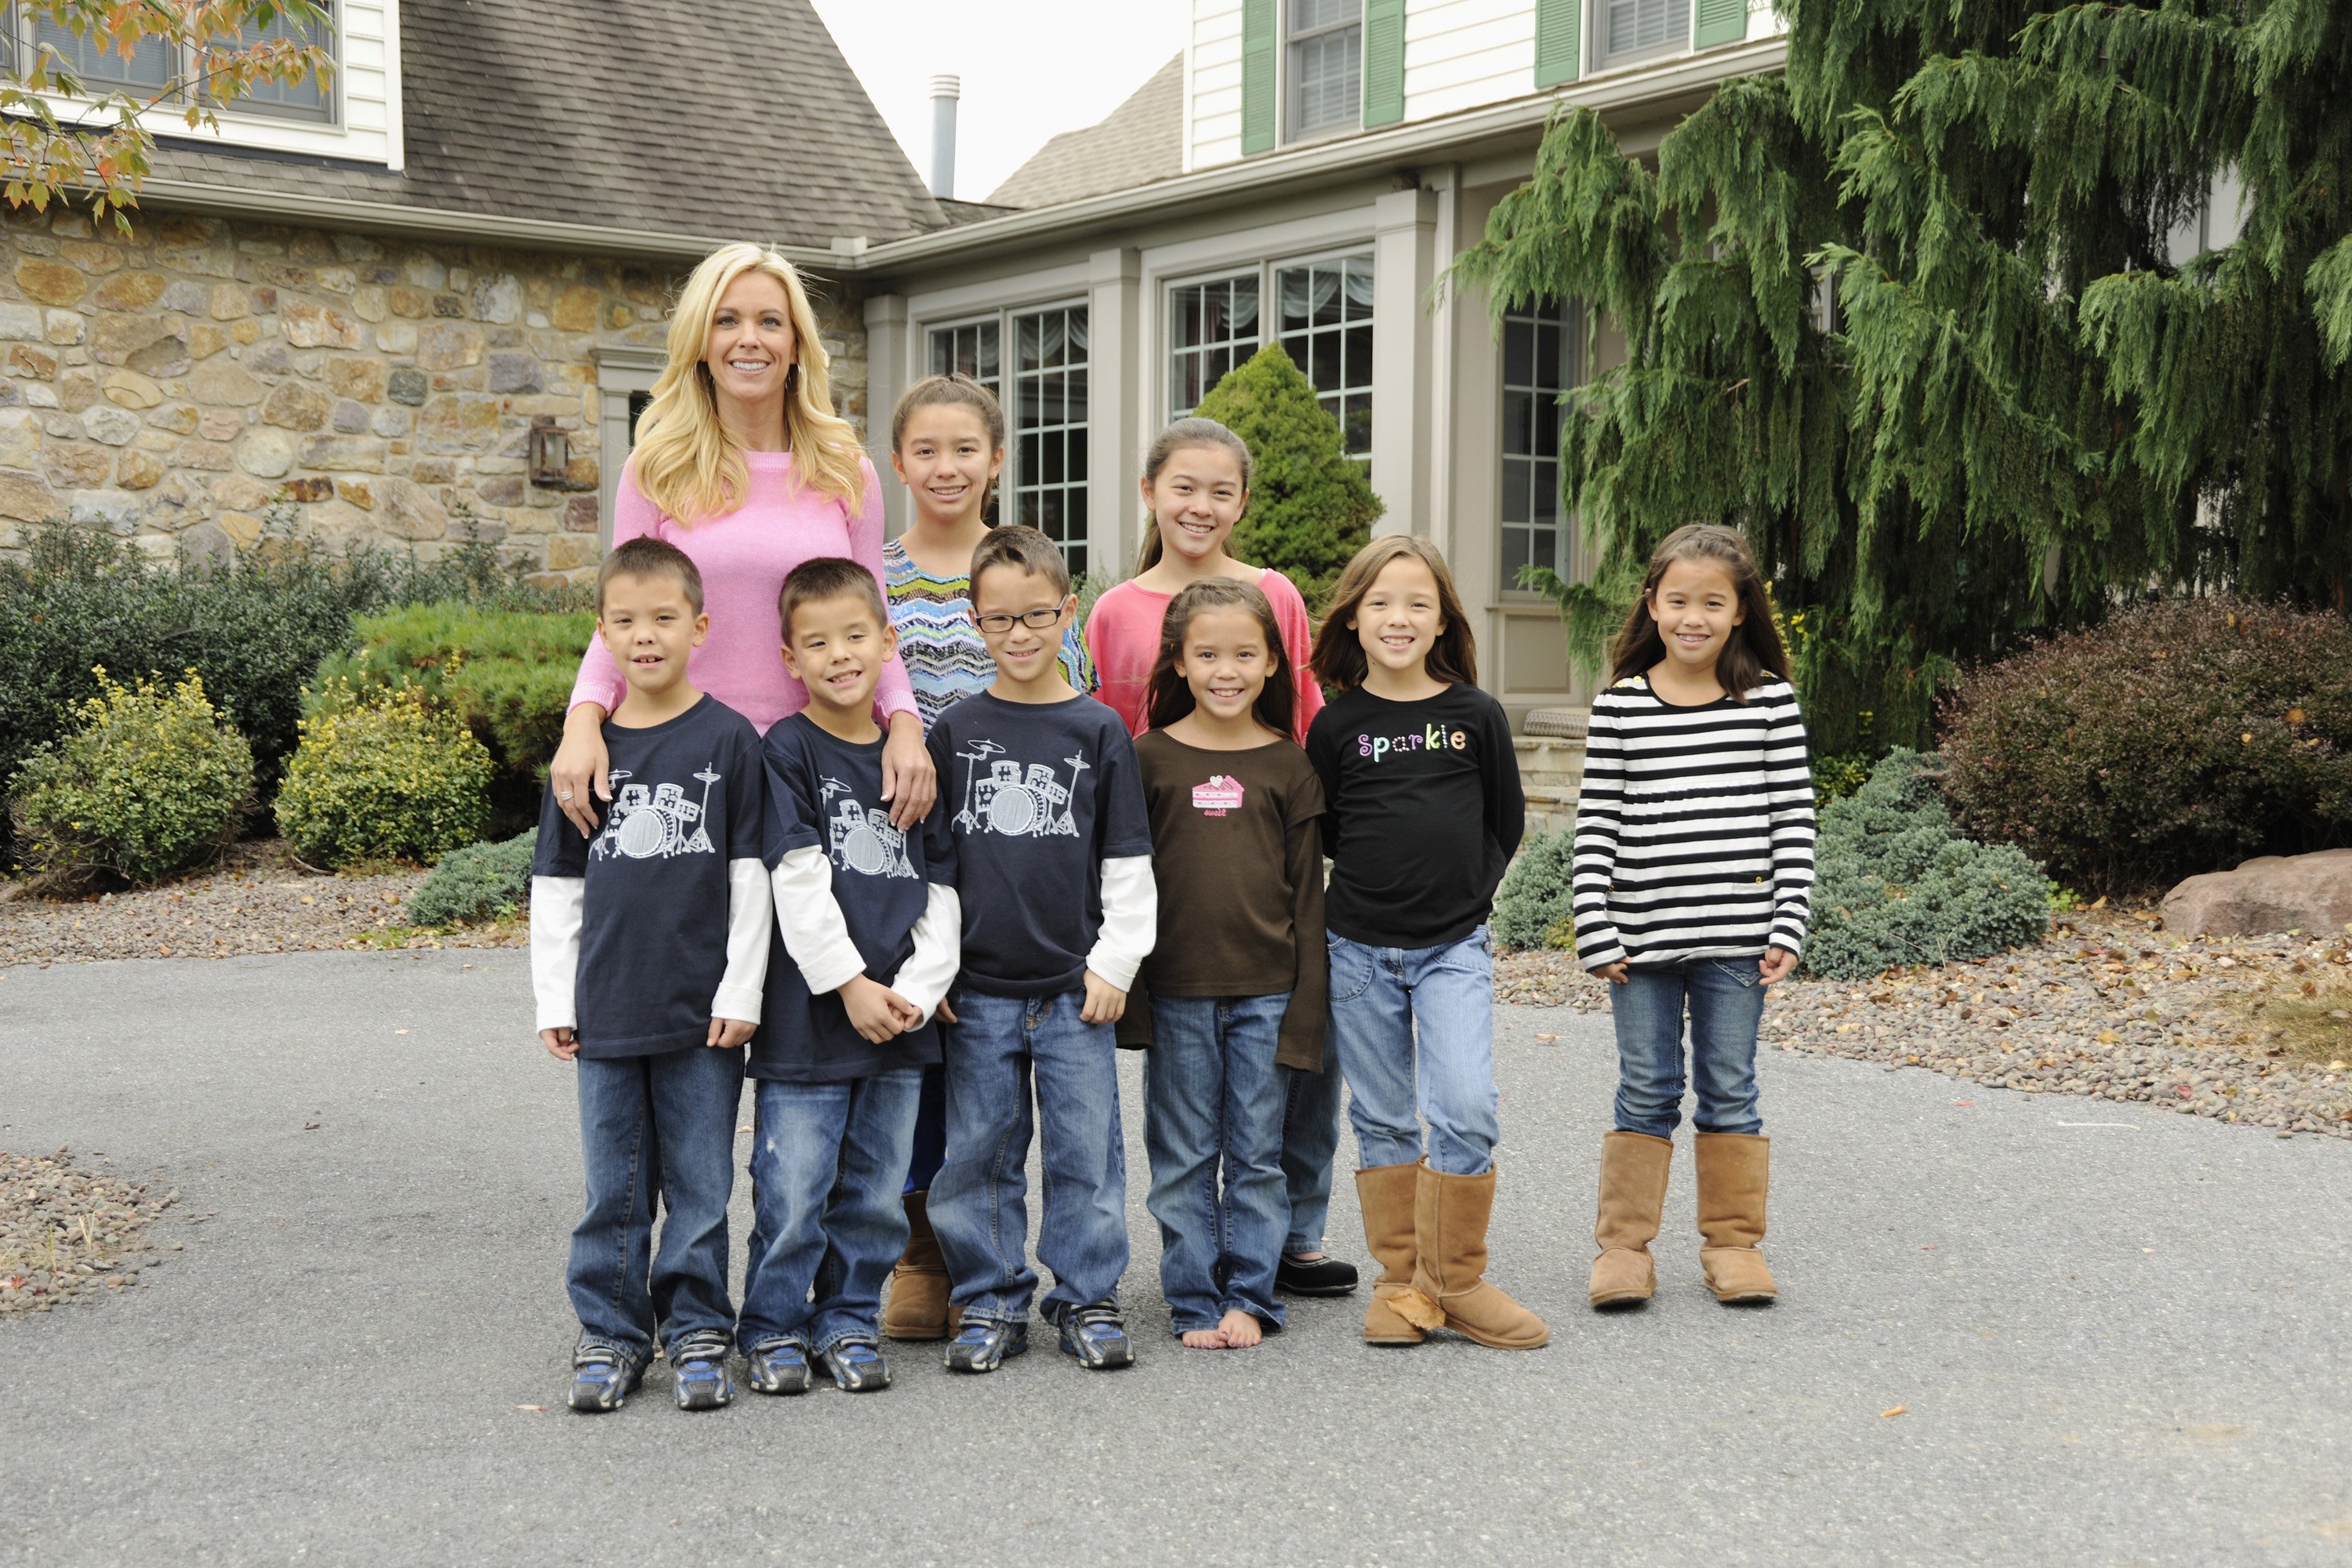 Kate Gosselin and her children photographed for her TLC show Kate plus 8 in 2012. | Source: Getty Images